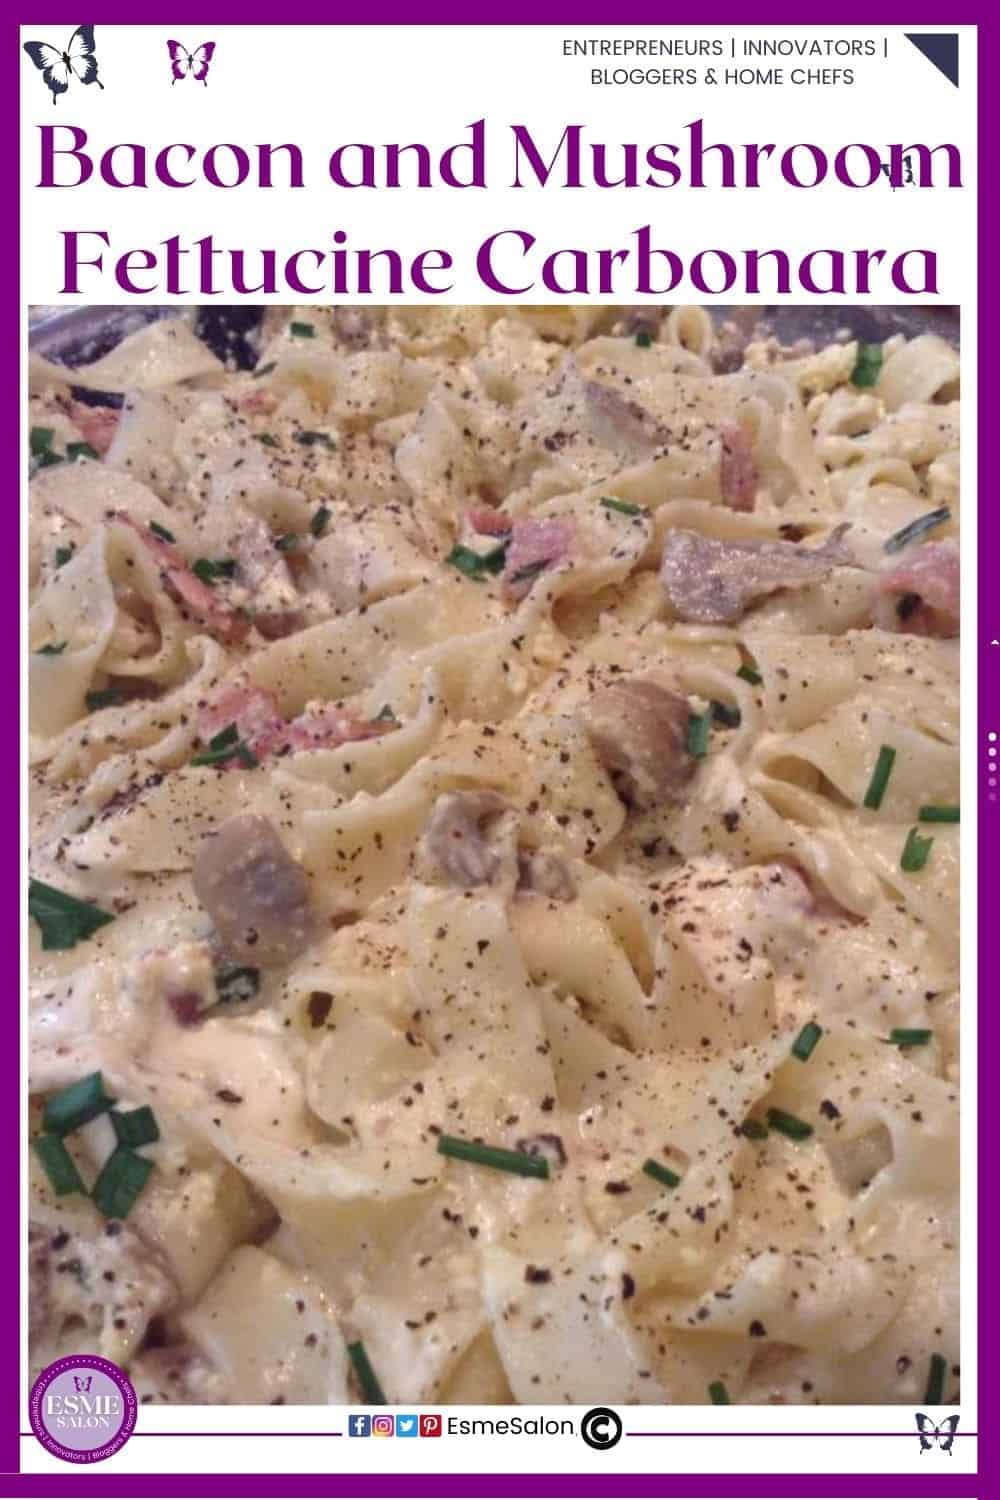 an image of a dish filled with creamy Bacon and Mushroom Fettucine Carbonara